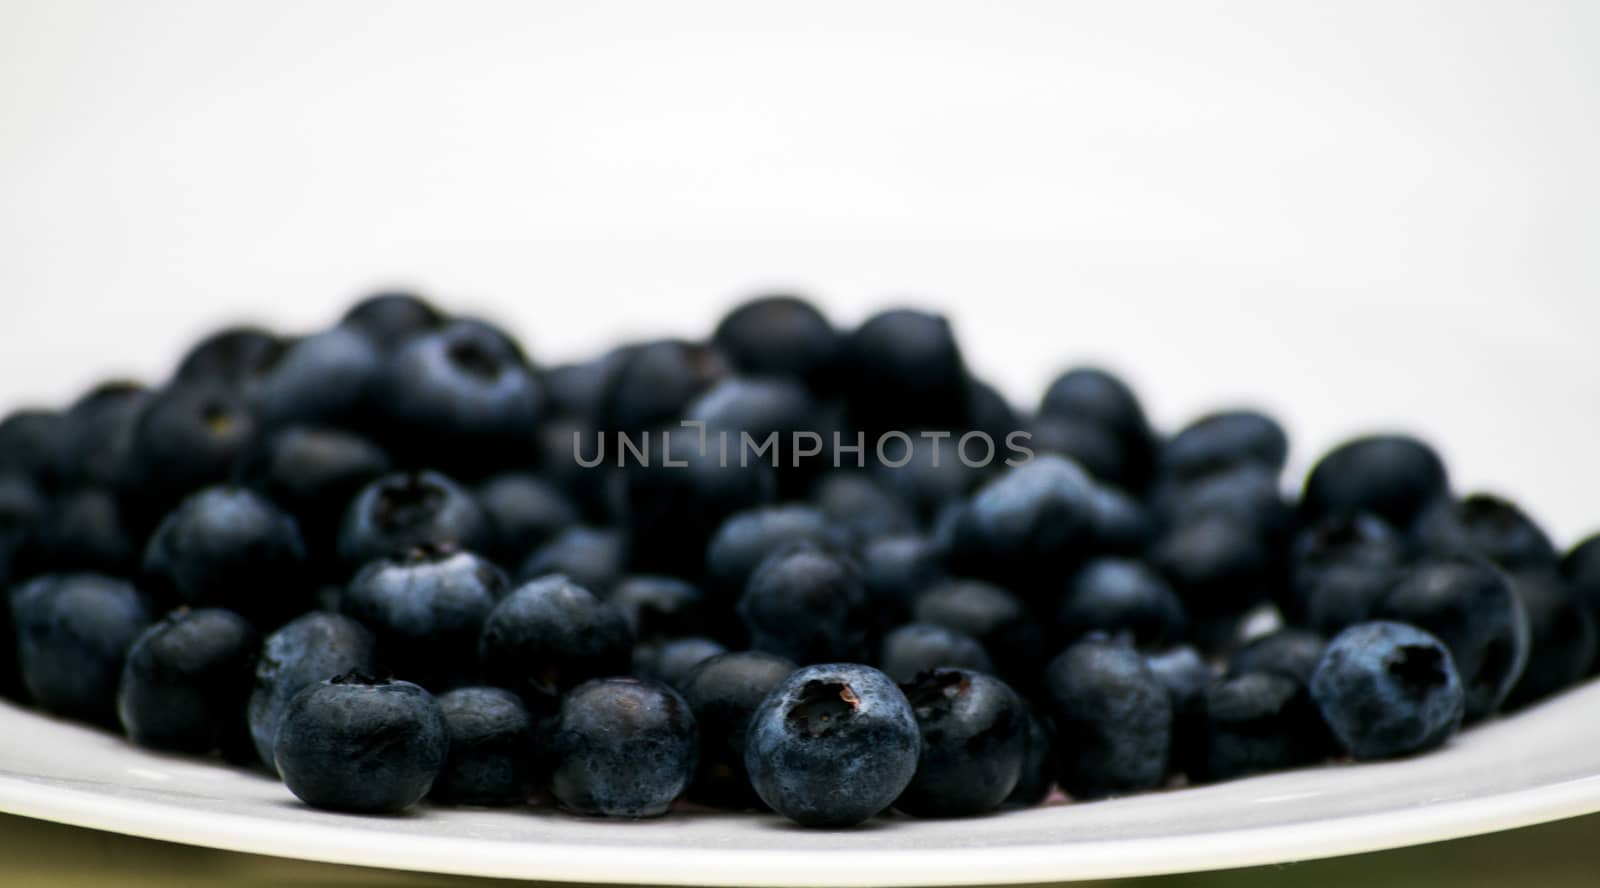 A moltitude of blueberries on a white background.